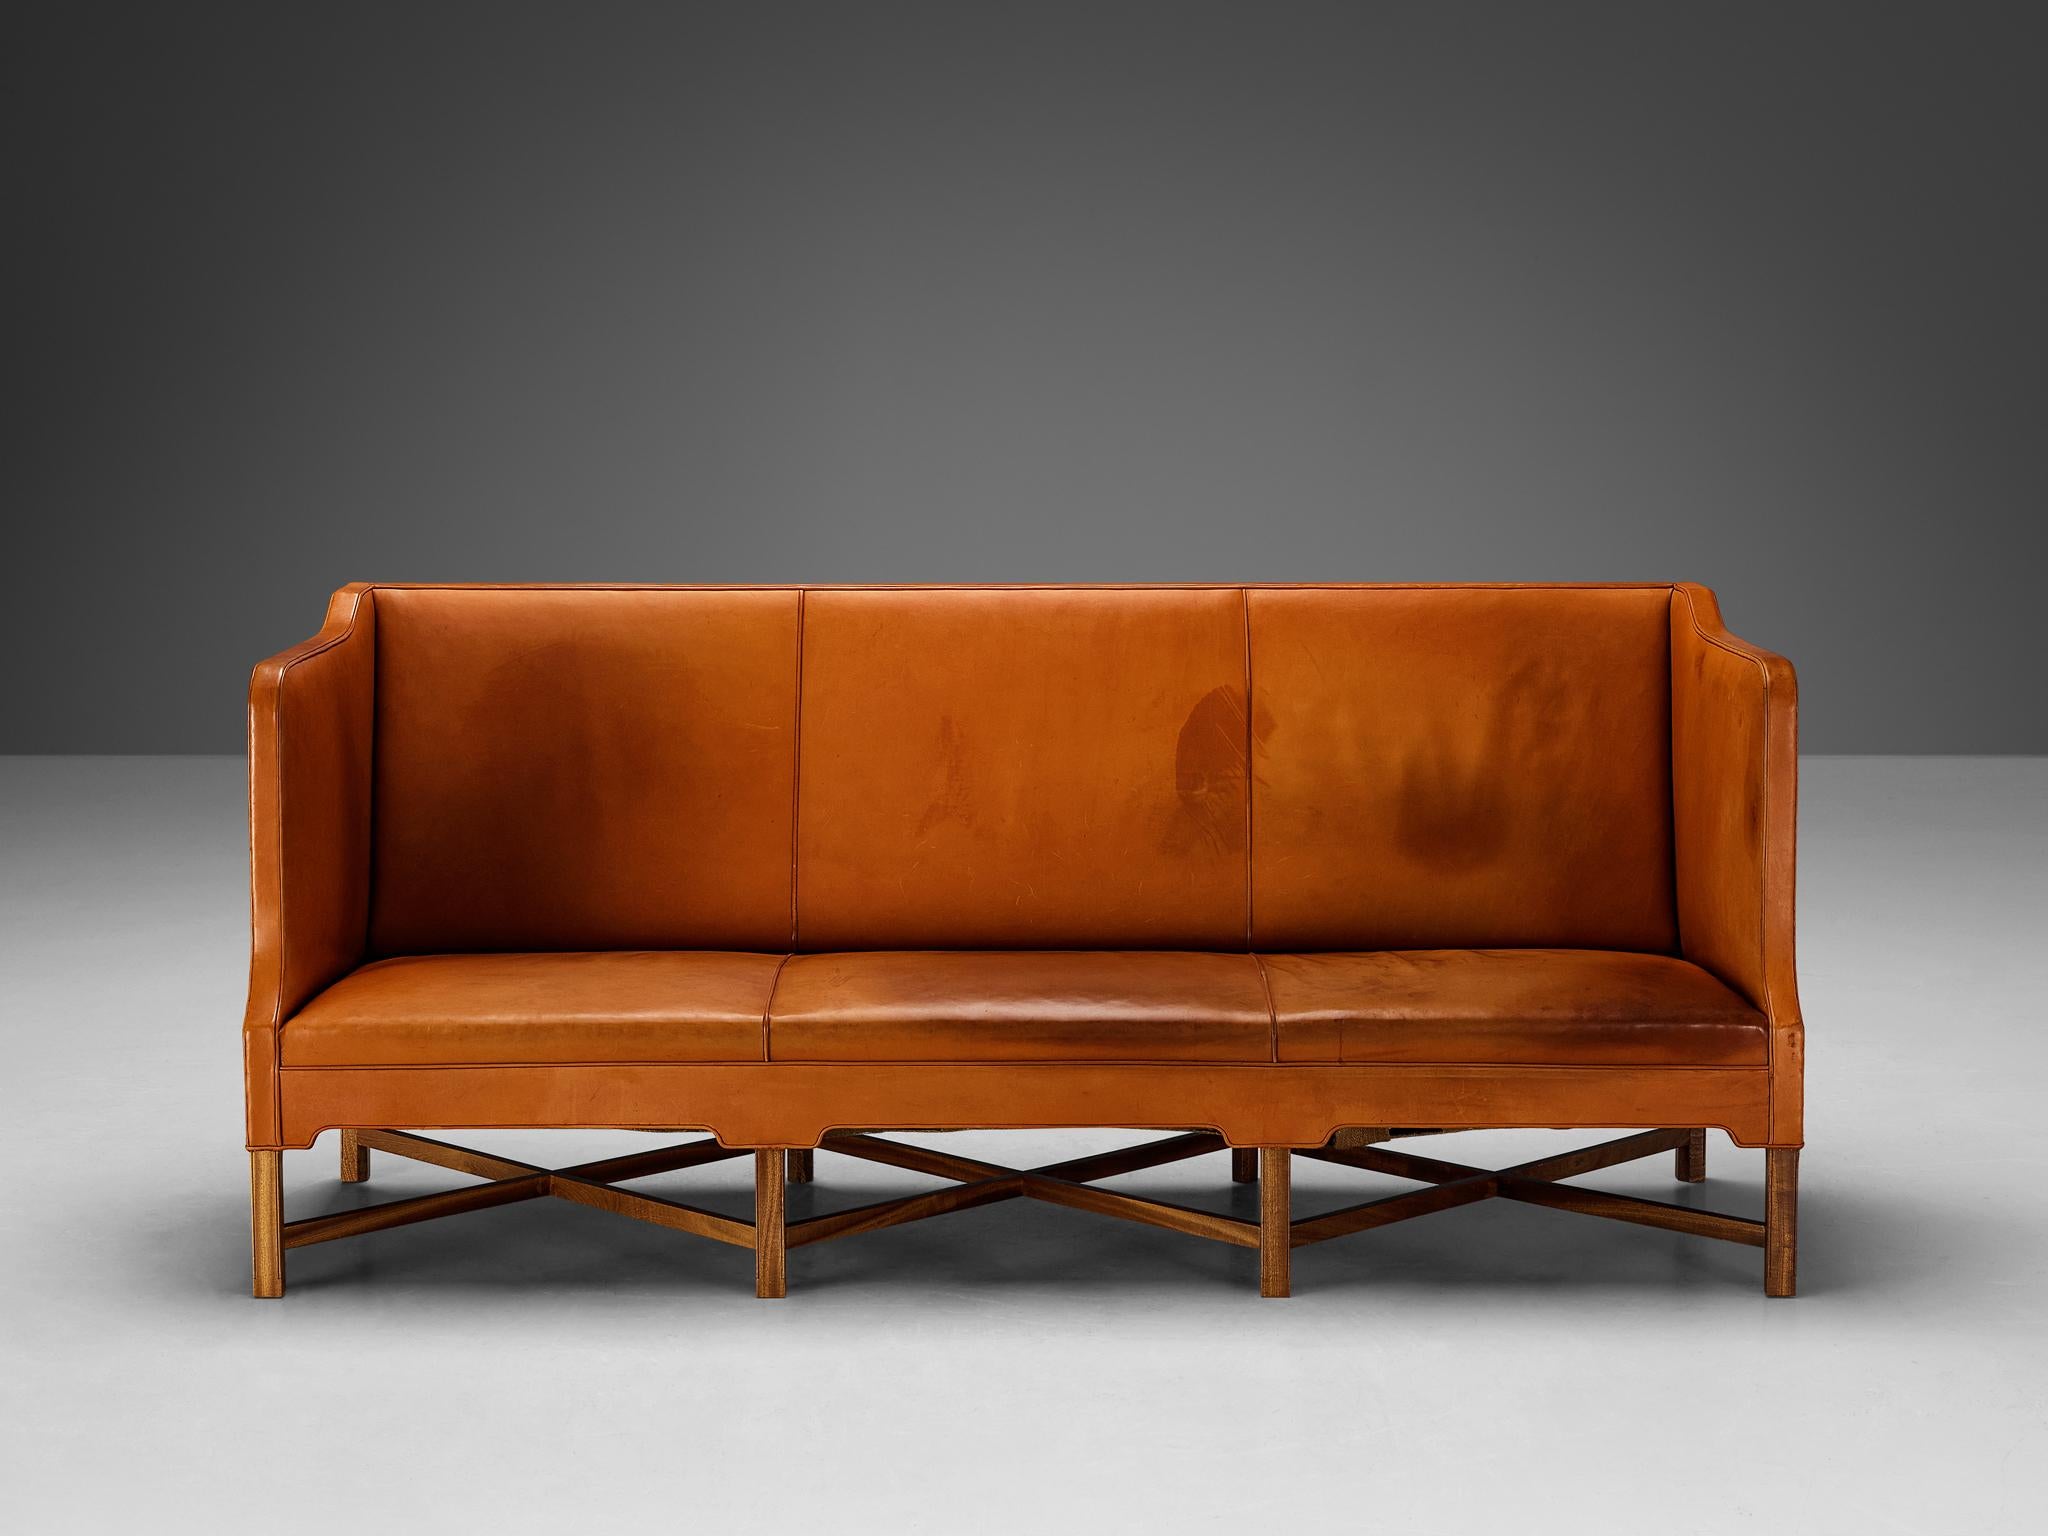 Danish Kaare Klint for Rud. Rasmussen Sofa Model 4118 in Leather and Mahogany  For Sale